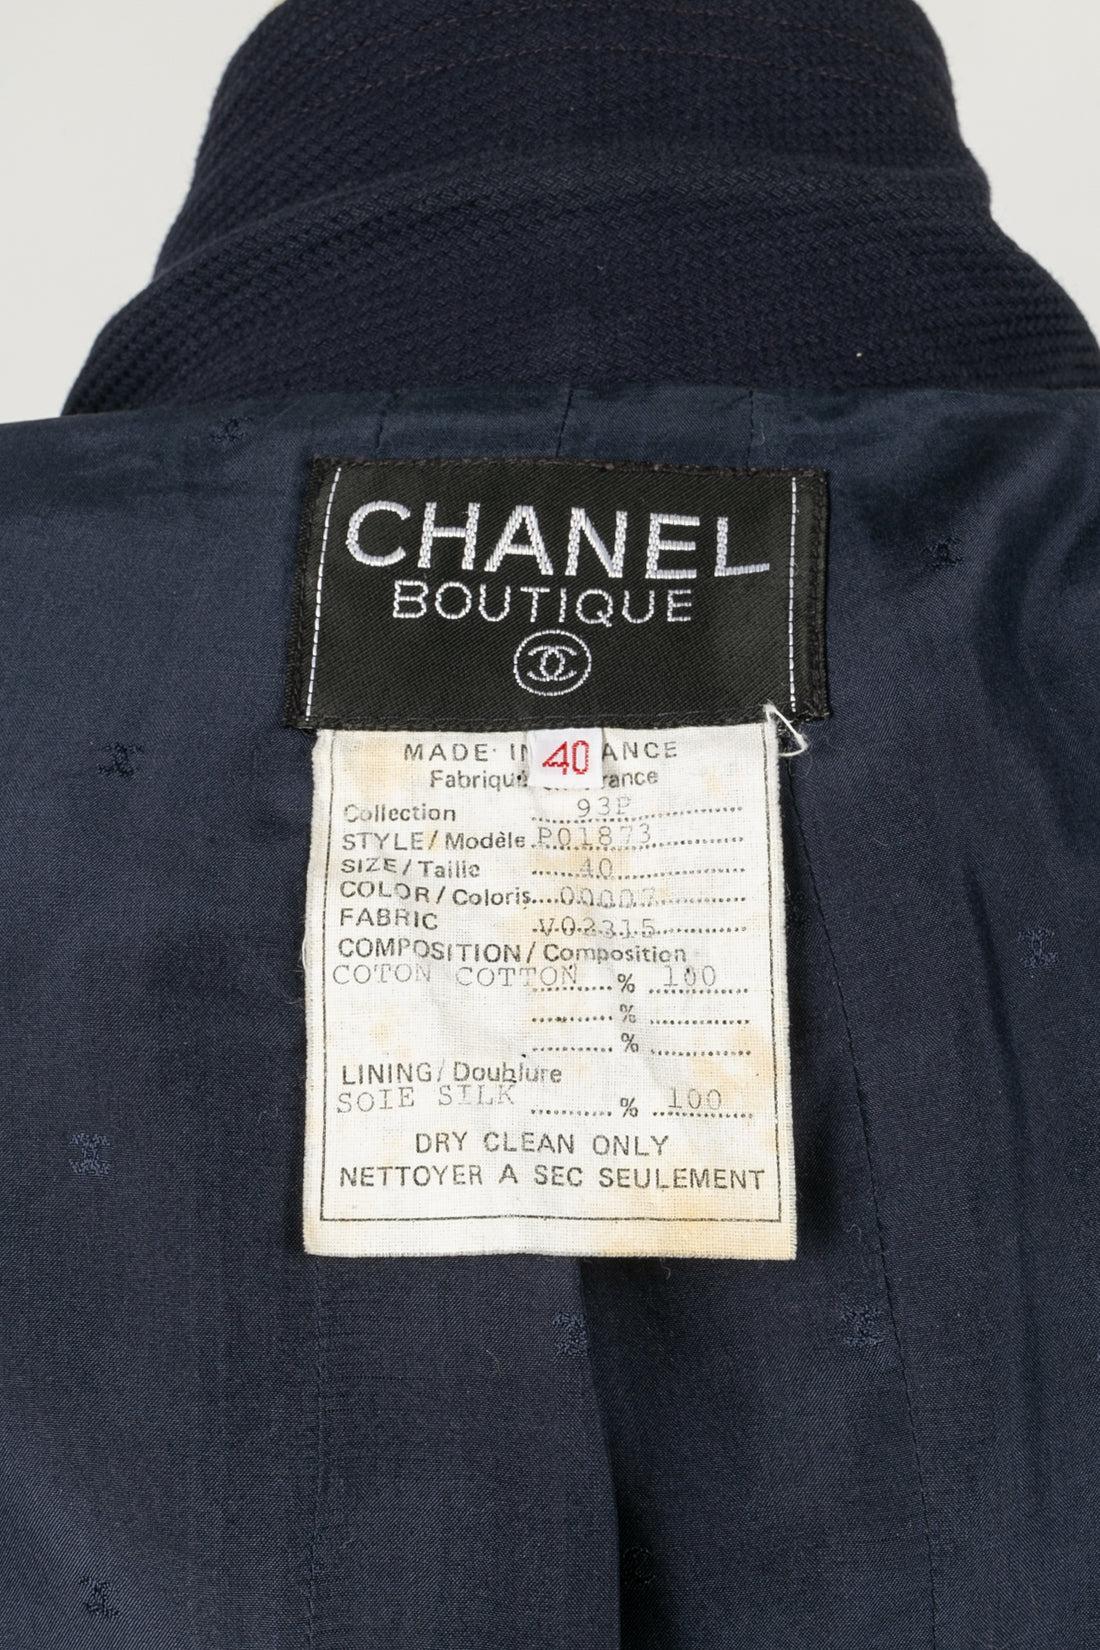 Chanel Jewel Jacket and a Long Skirt Outfit Spring, 1993 For Sale 11